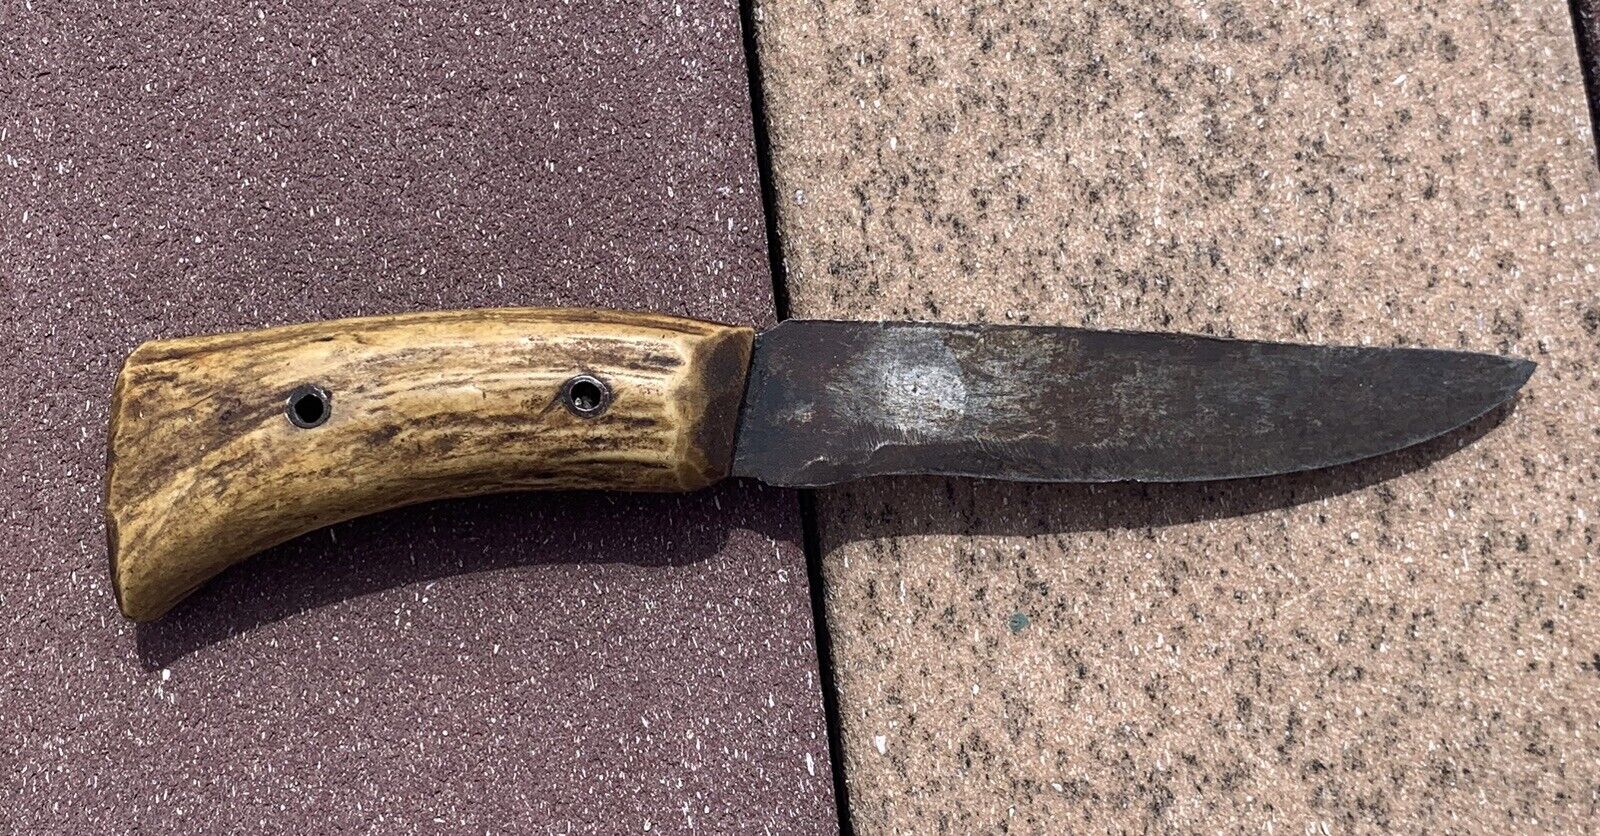 Very Early Primitive Frontier or Indian Used Knife ca. 1850